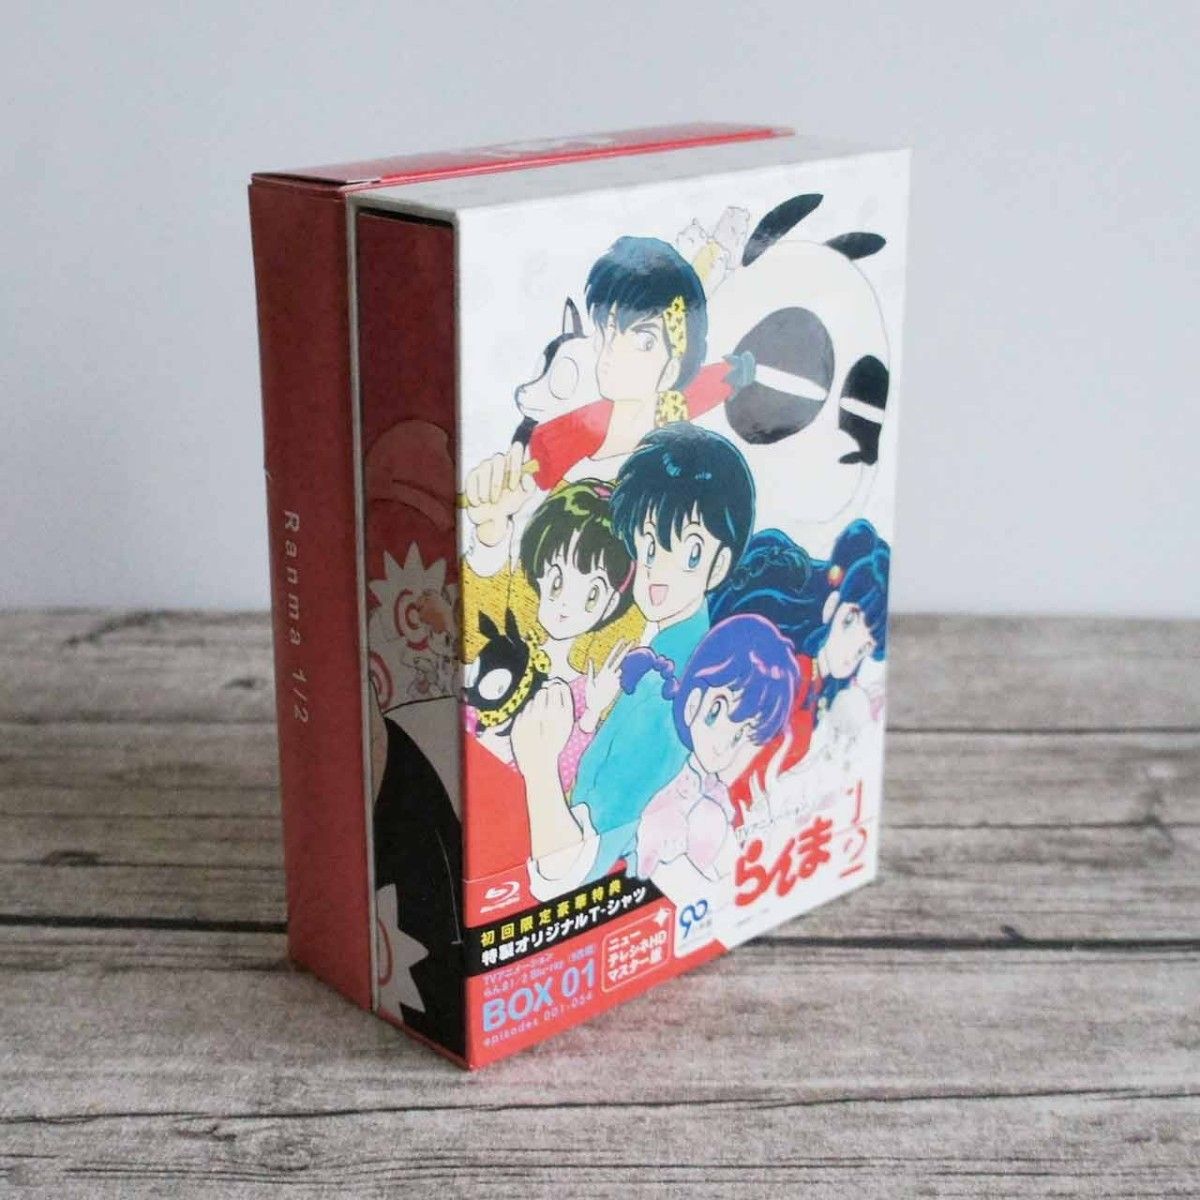 Ranma 1/2: TV Series Set 7 [Limited Edition] [Blu-ray] - Best Buy